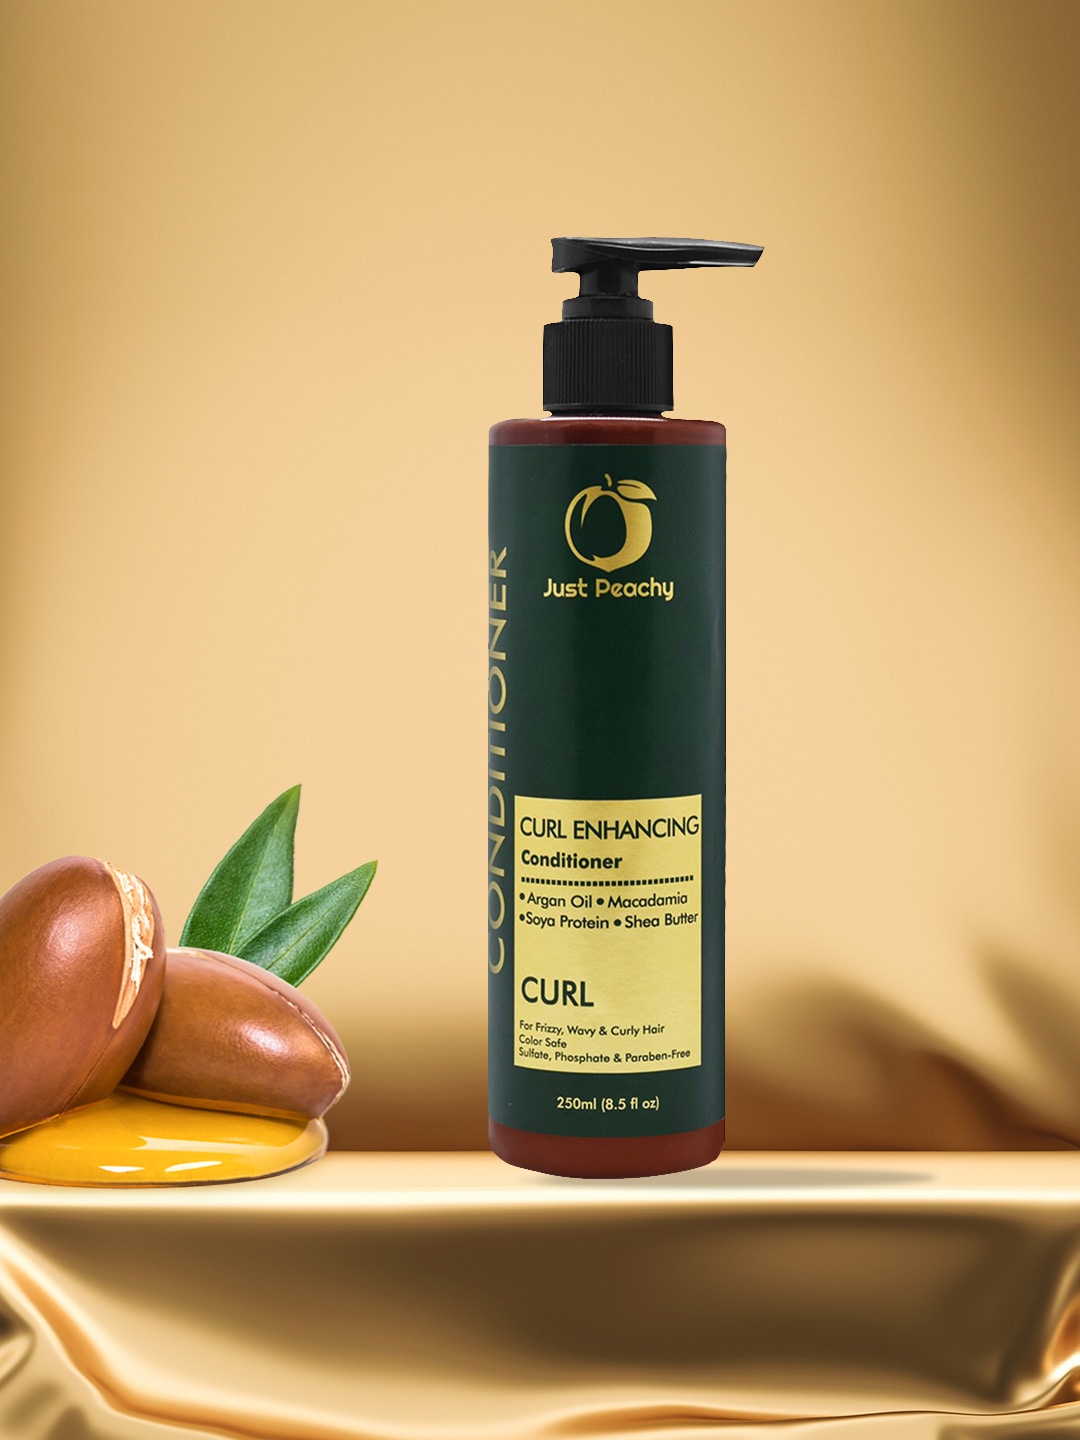 Just Peachy Curl Enhancing Sulfate Free Conditioner 250ml Price in India